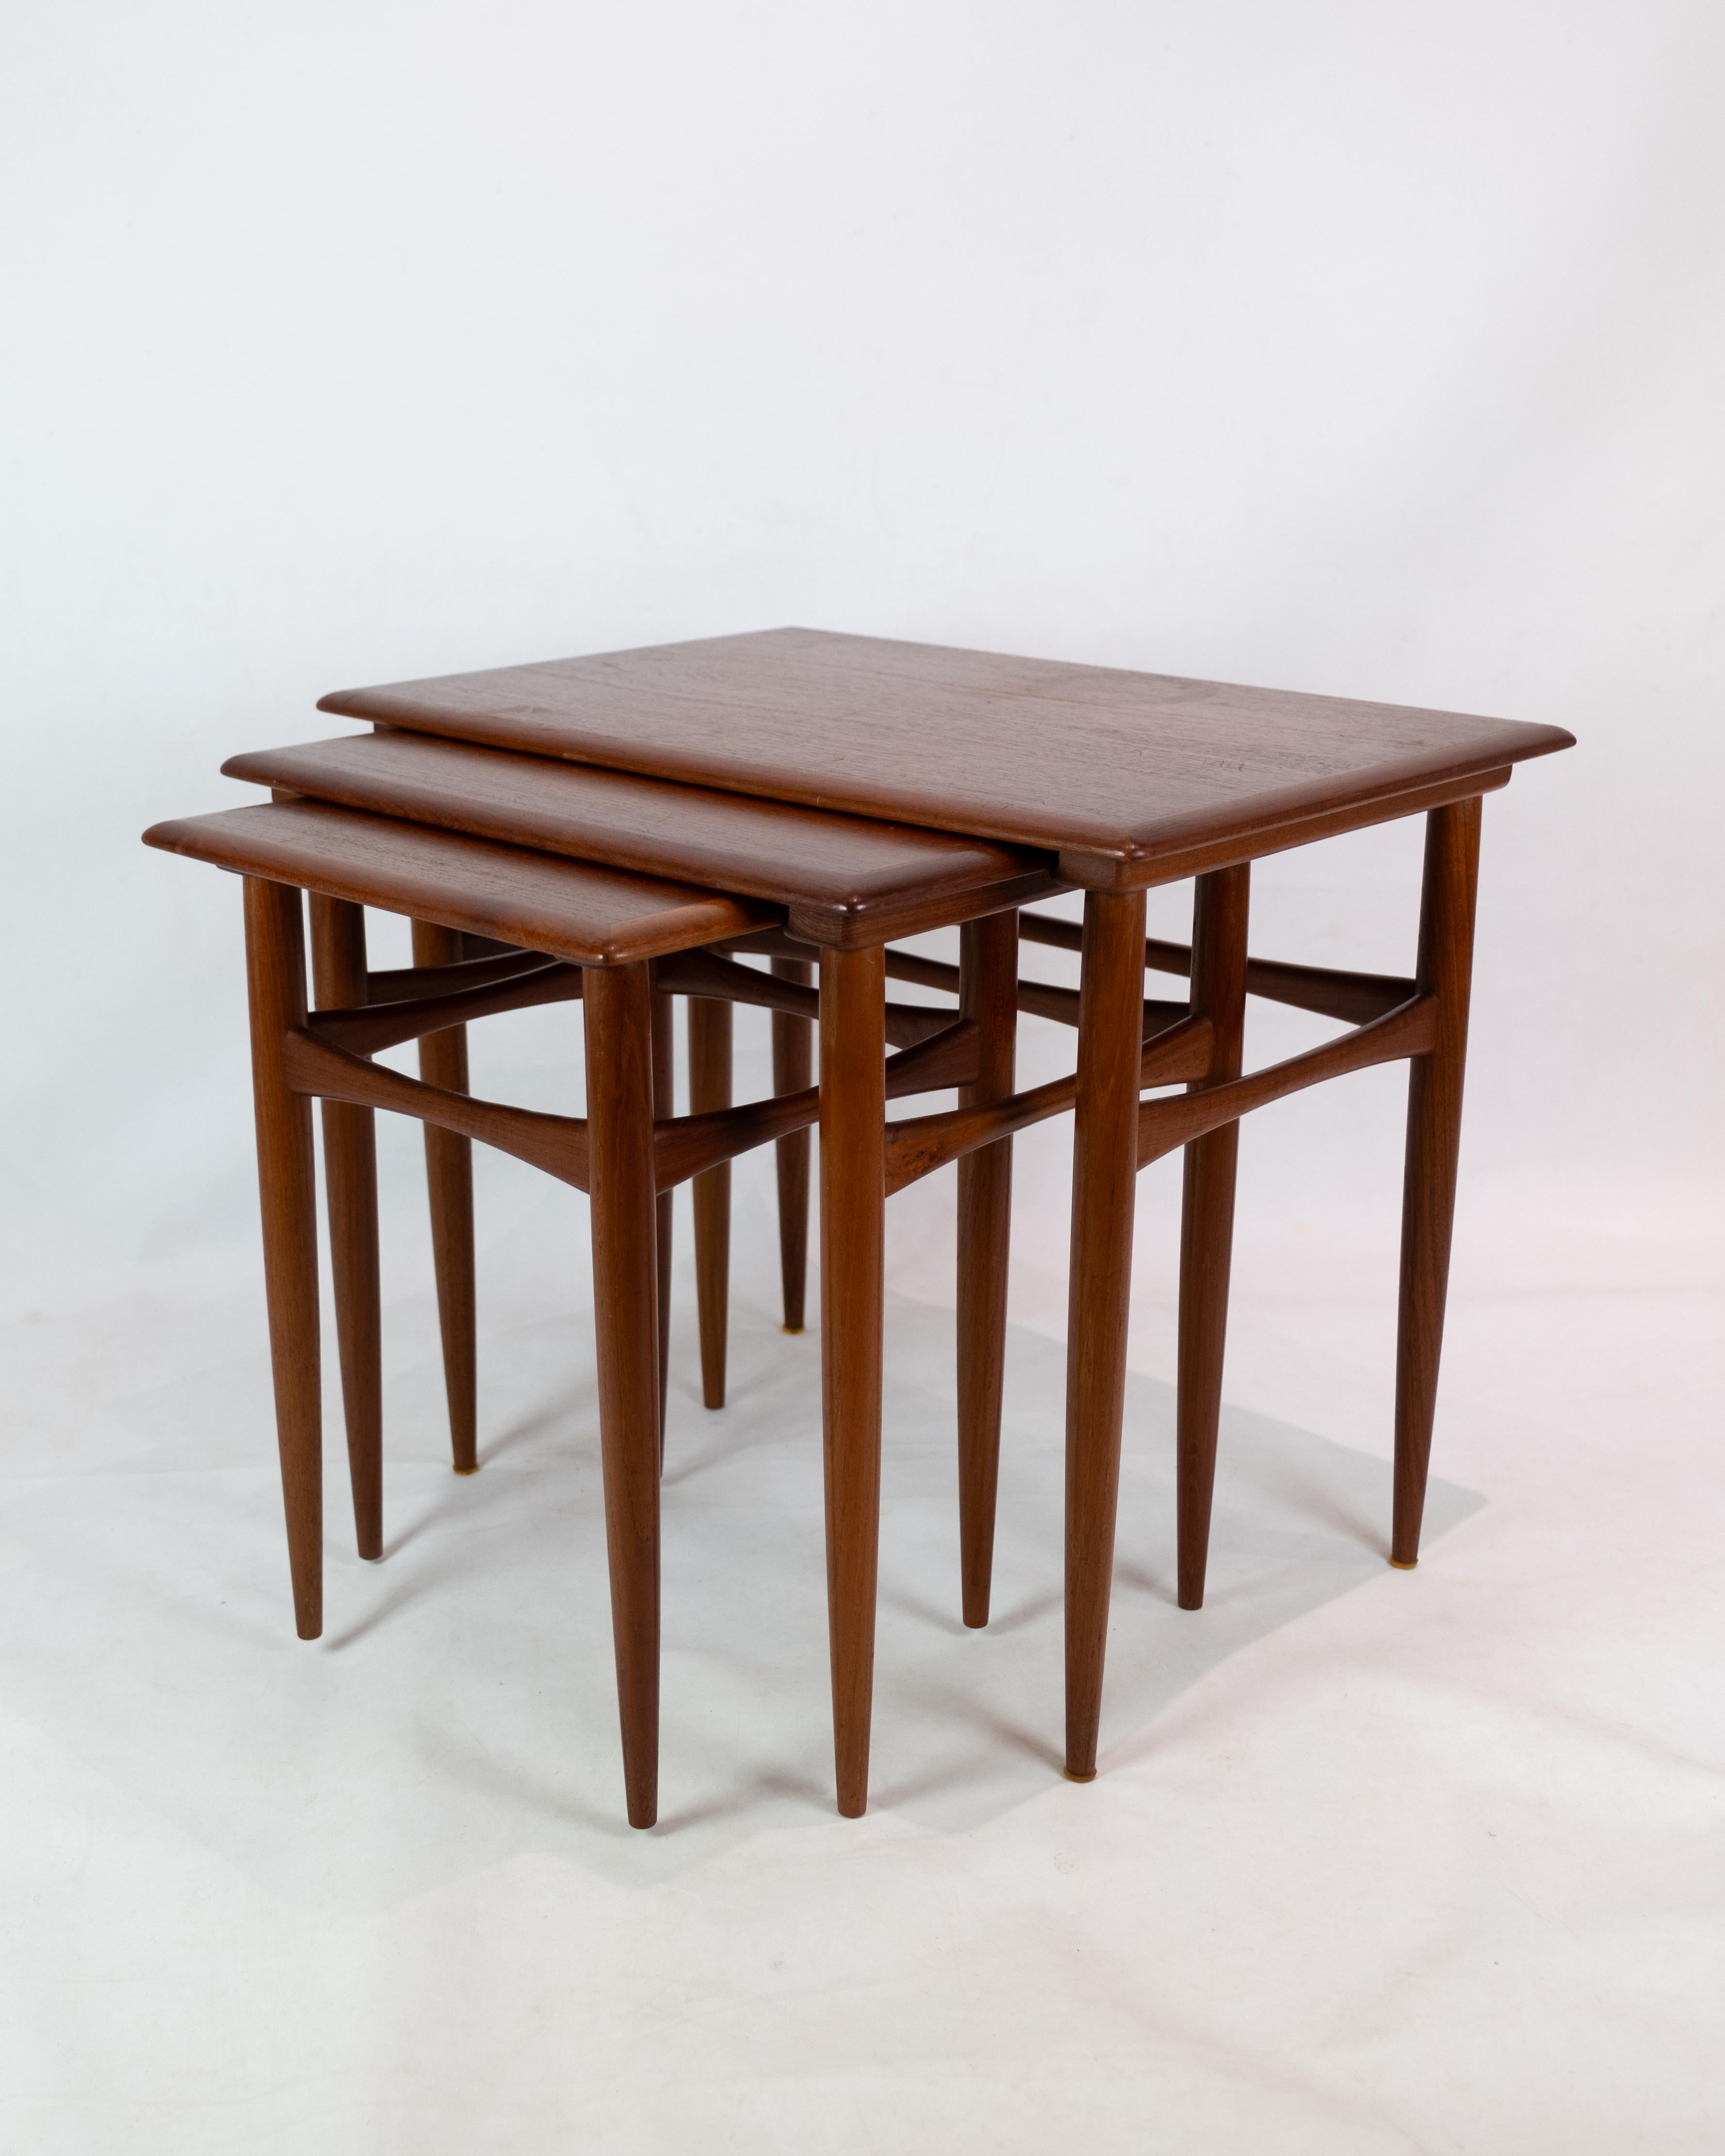 Side tables made of teak wood, produced by a Danish furniture architect around the 1960s, are beautiful and timeless pieces of furniture with roots in the Scandinavian design tradition.

Teak wood is known for its natural beauty, durability and warm